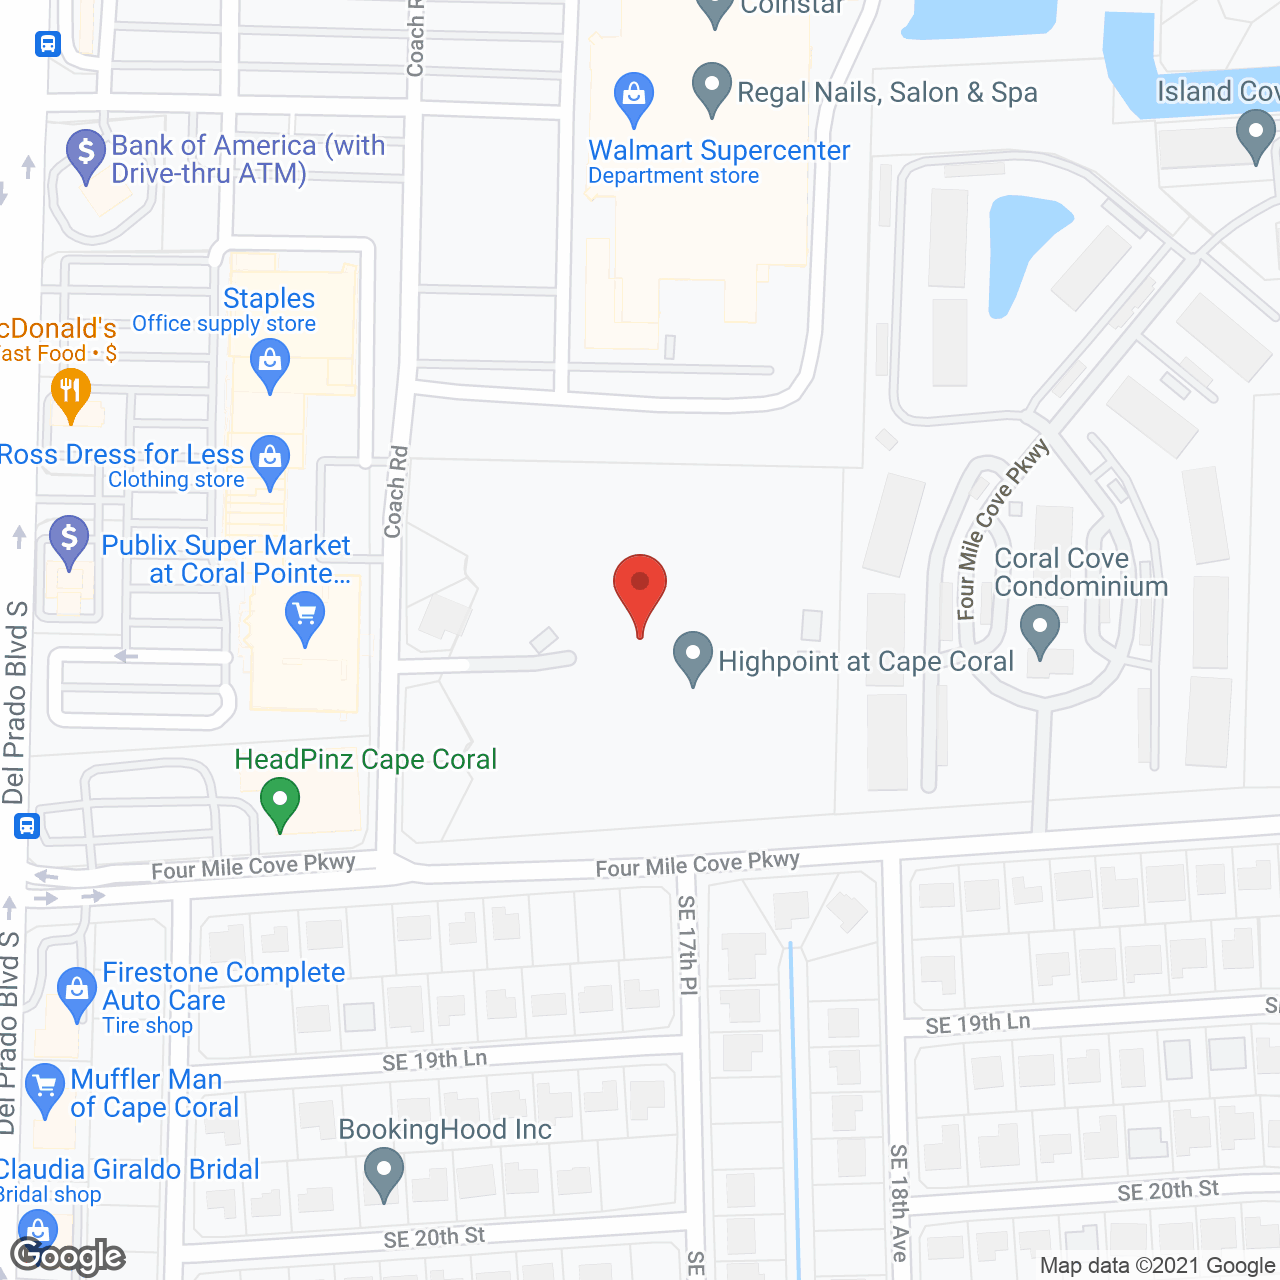 Highpoint at Cape Coral in google map